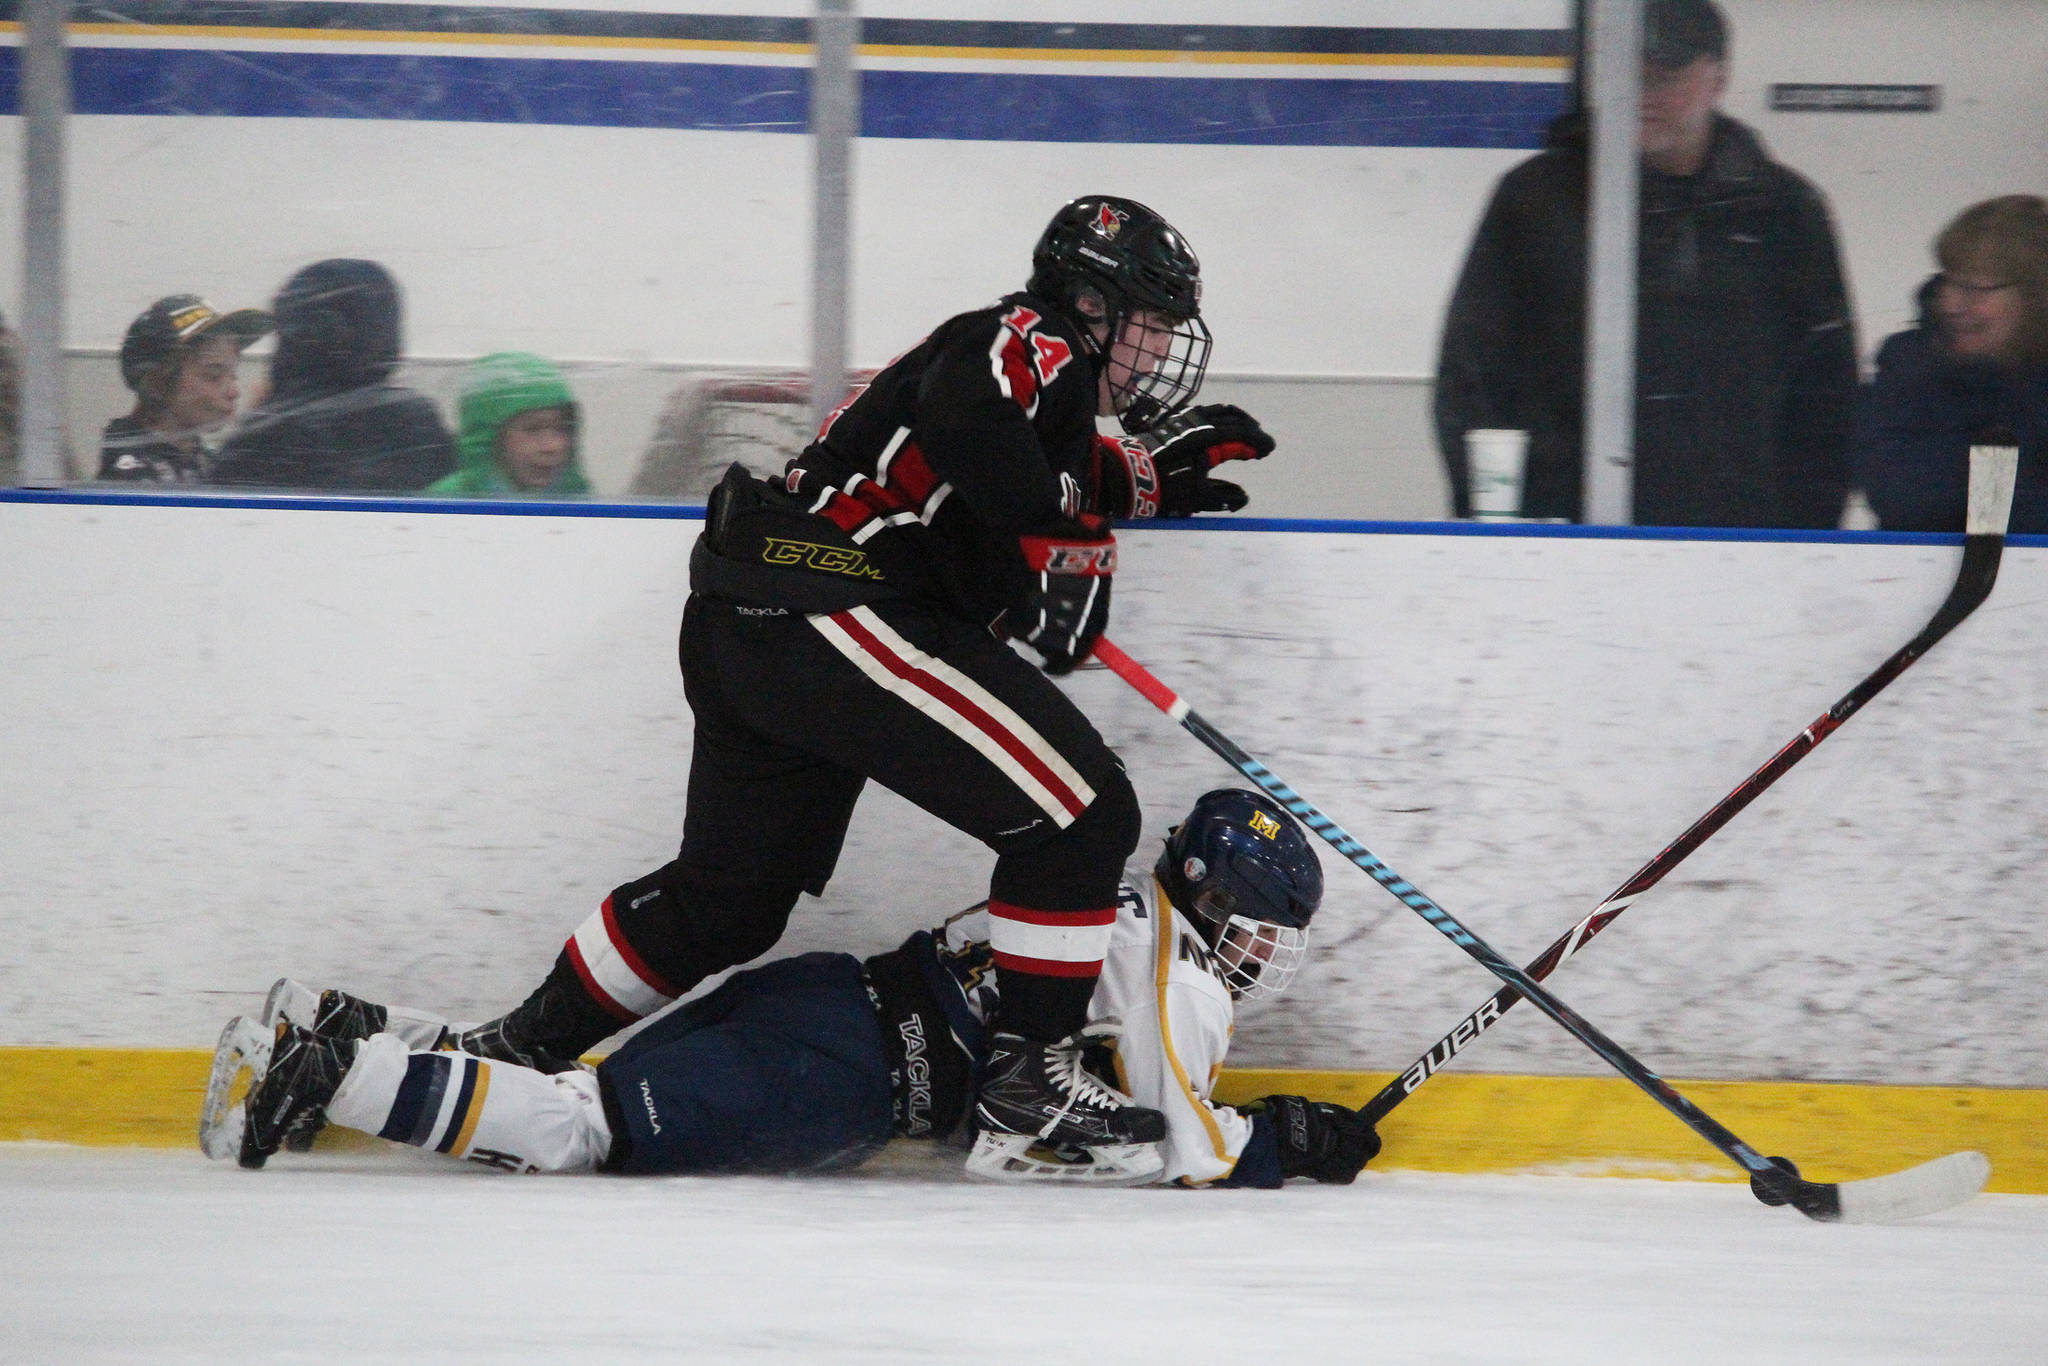 Kenai’s Miles Marsten steps over Homer’s Lee Lowe after Lowe fell while both were chasing the puck during a game between the two schools Friday, Nov. 16, 2018 at the End of the Road Shootout at Kevin Bell Arena in Homer, Alaska. (Photo by Megan Pacer/Homer News)